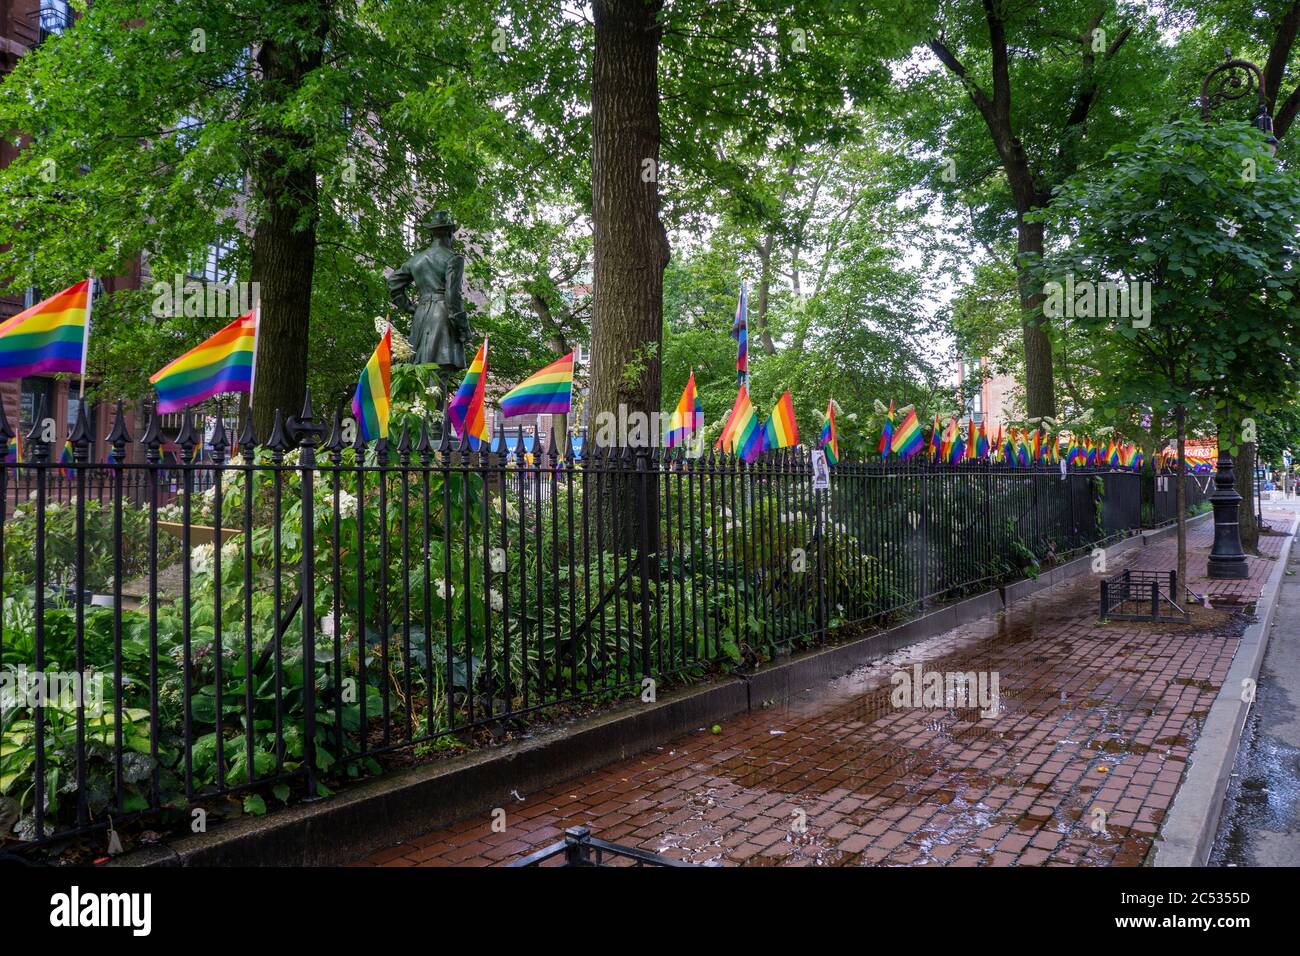 Gay Pride Flags on Park Fence, New York, New York, États-Unis Banque D'Images